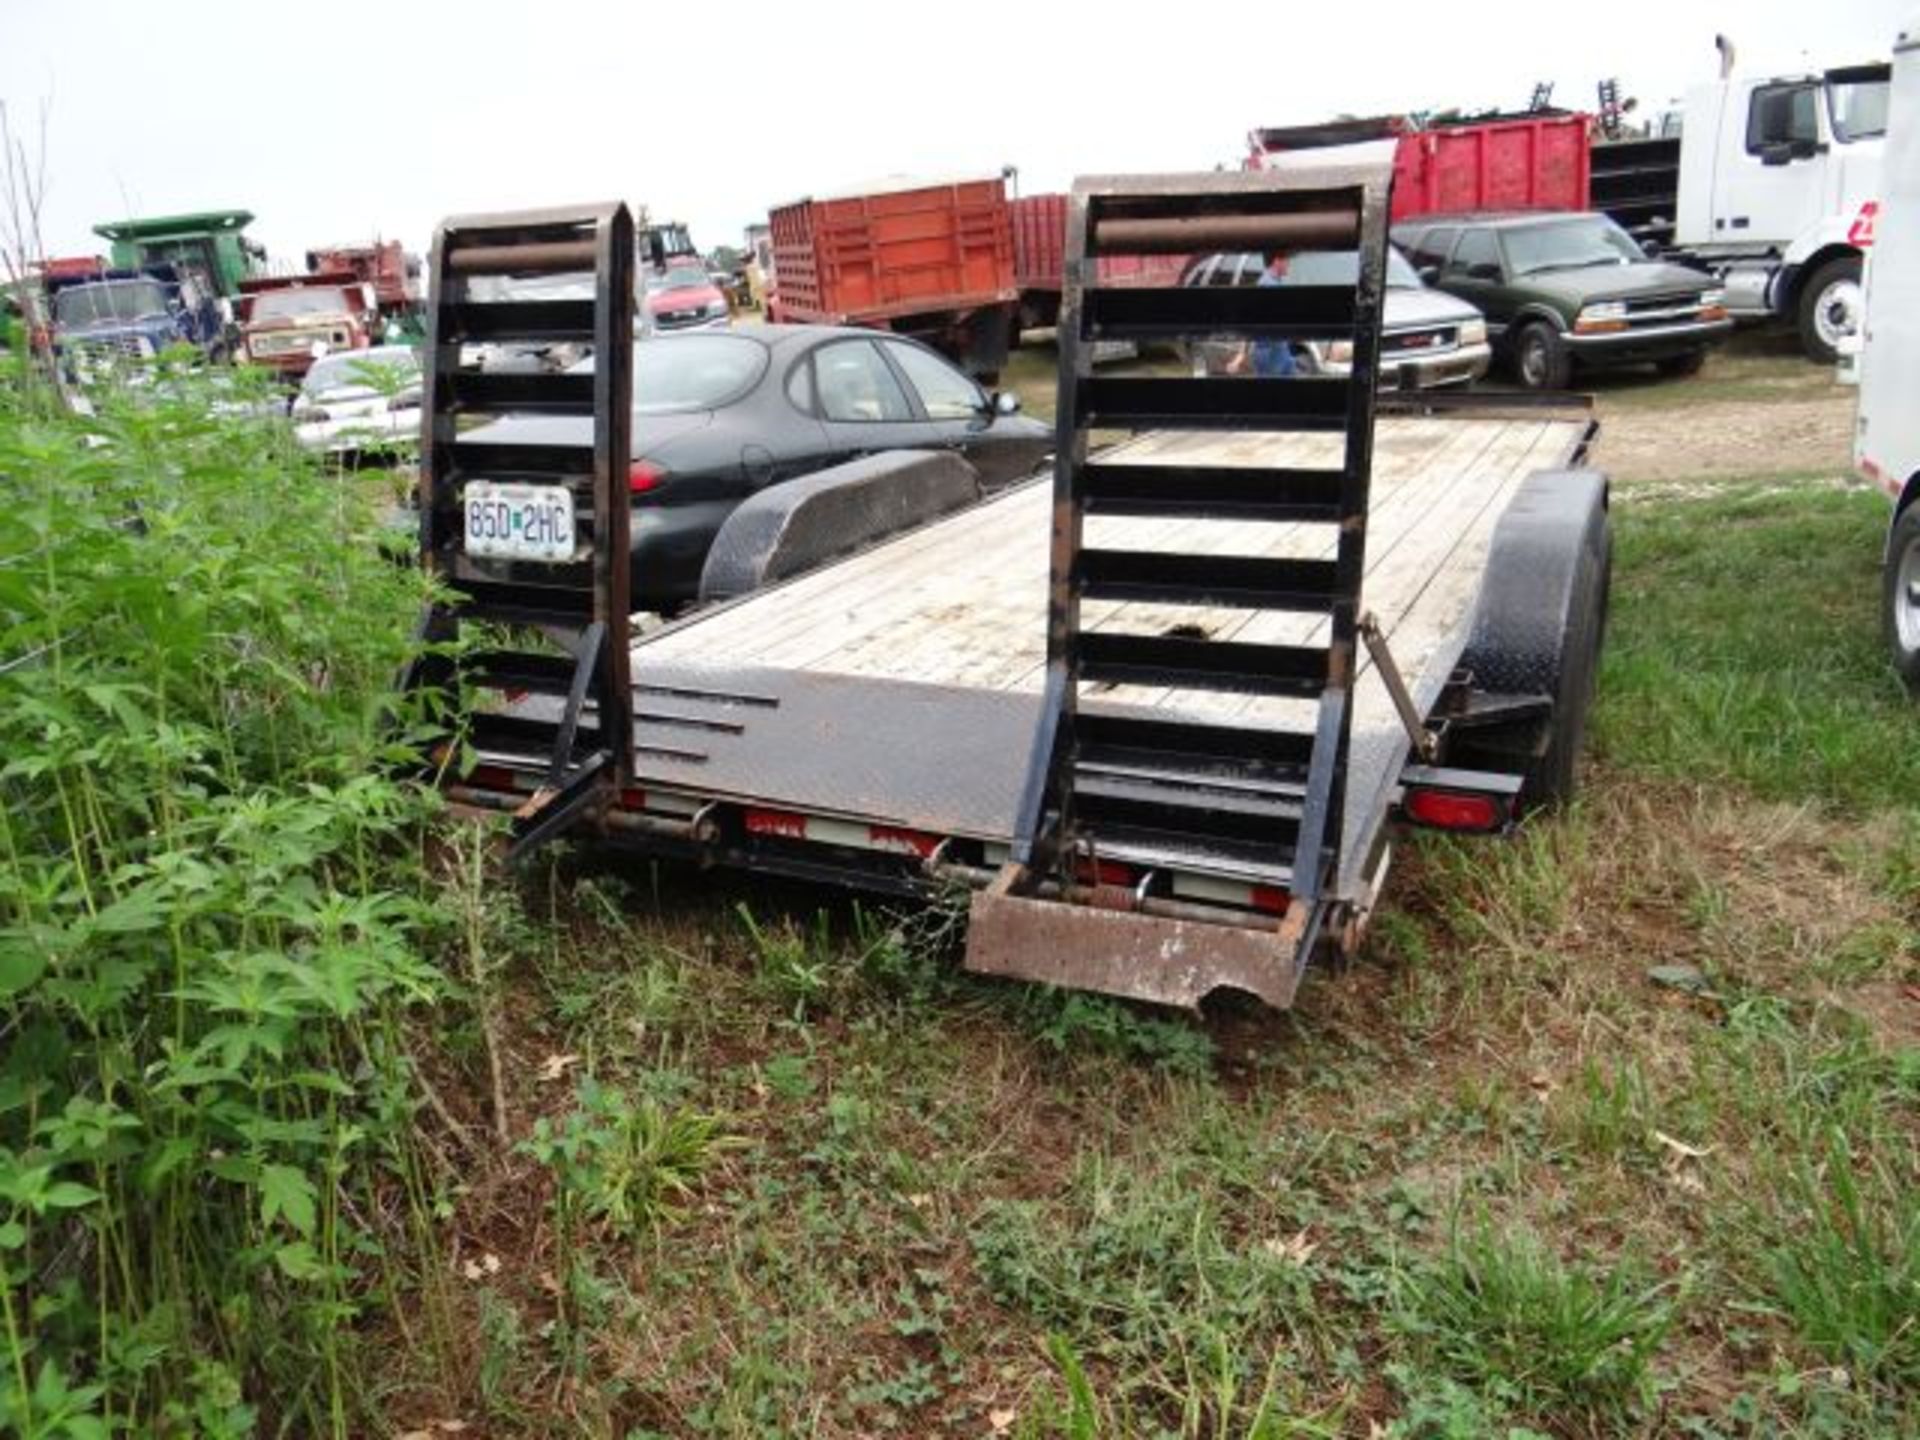 2011 Trailerman Flatbed Trailer 16', 7000# Axles, 4 New Tires, Ramps, Title in the Office - Image 3 of 3